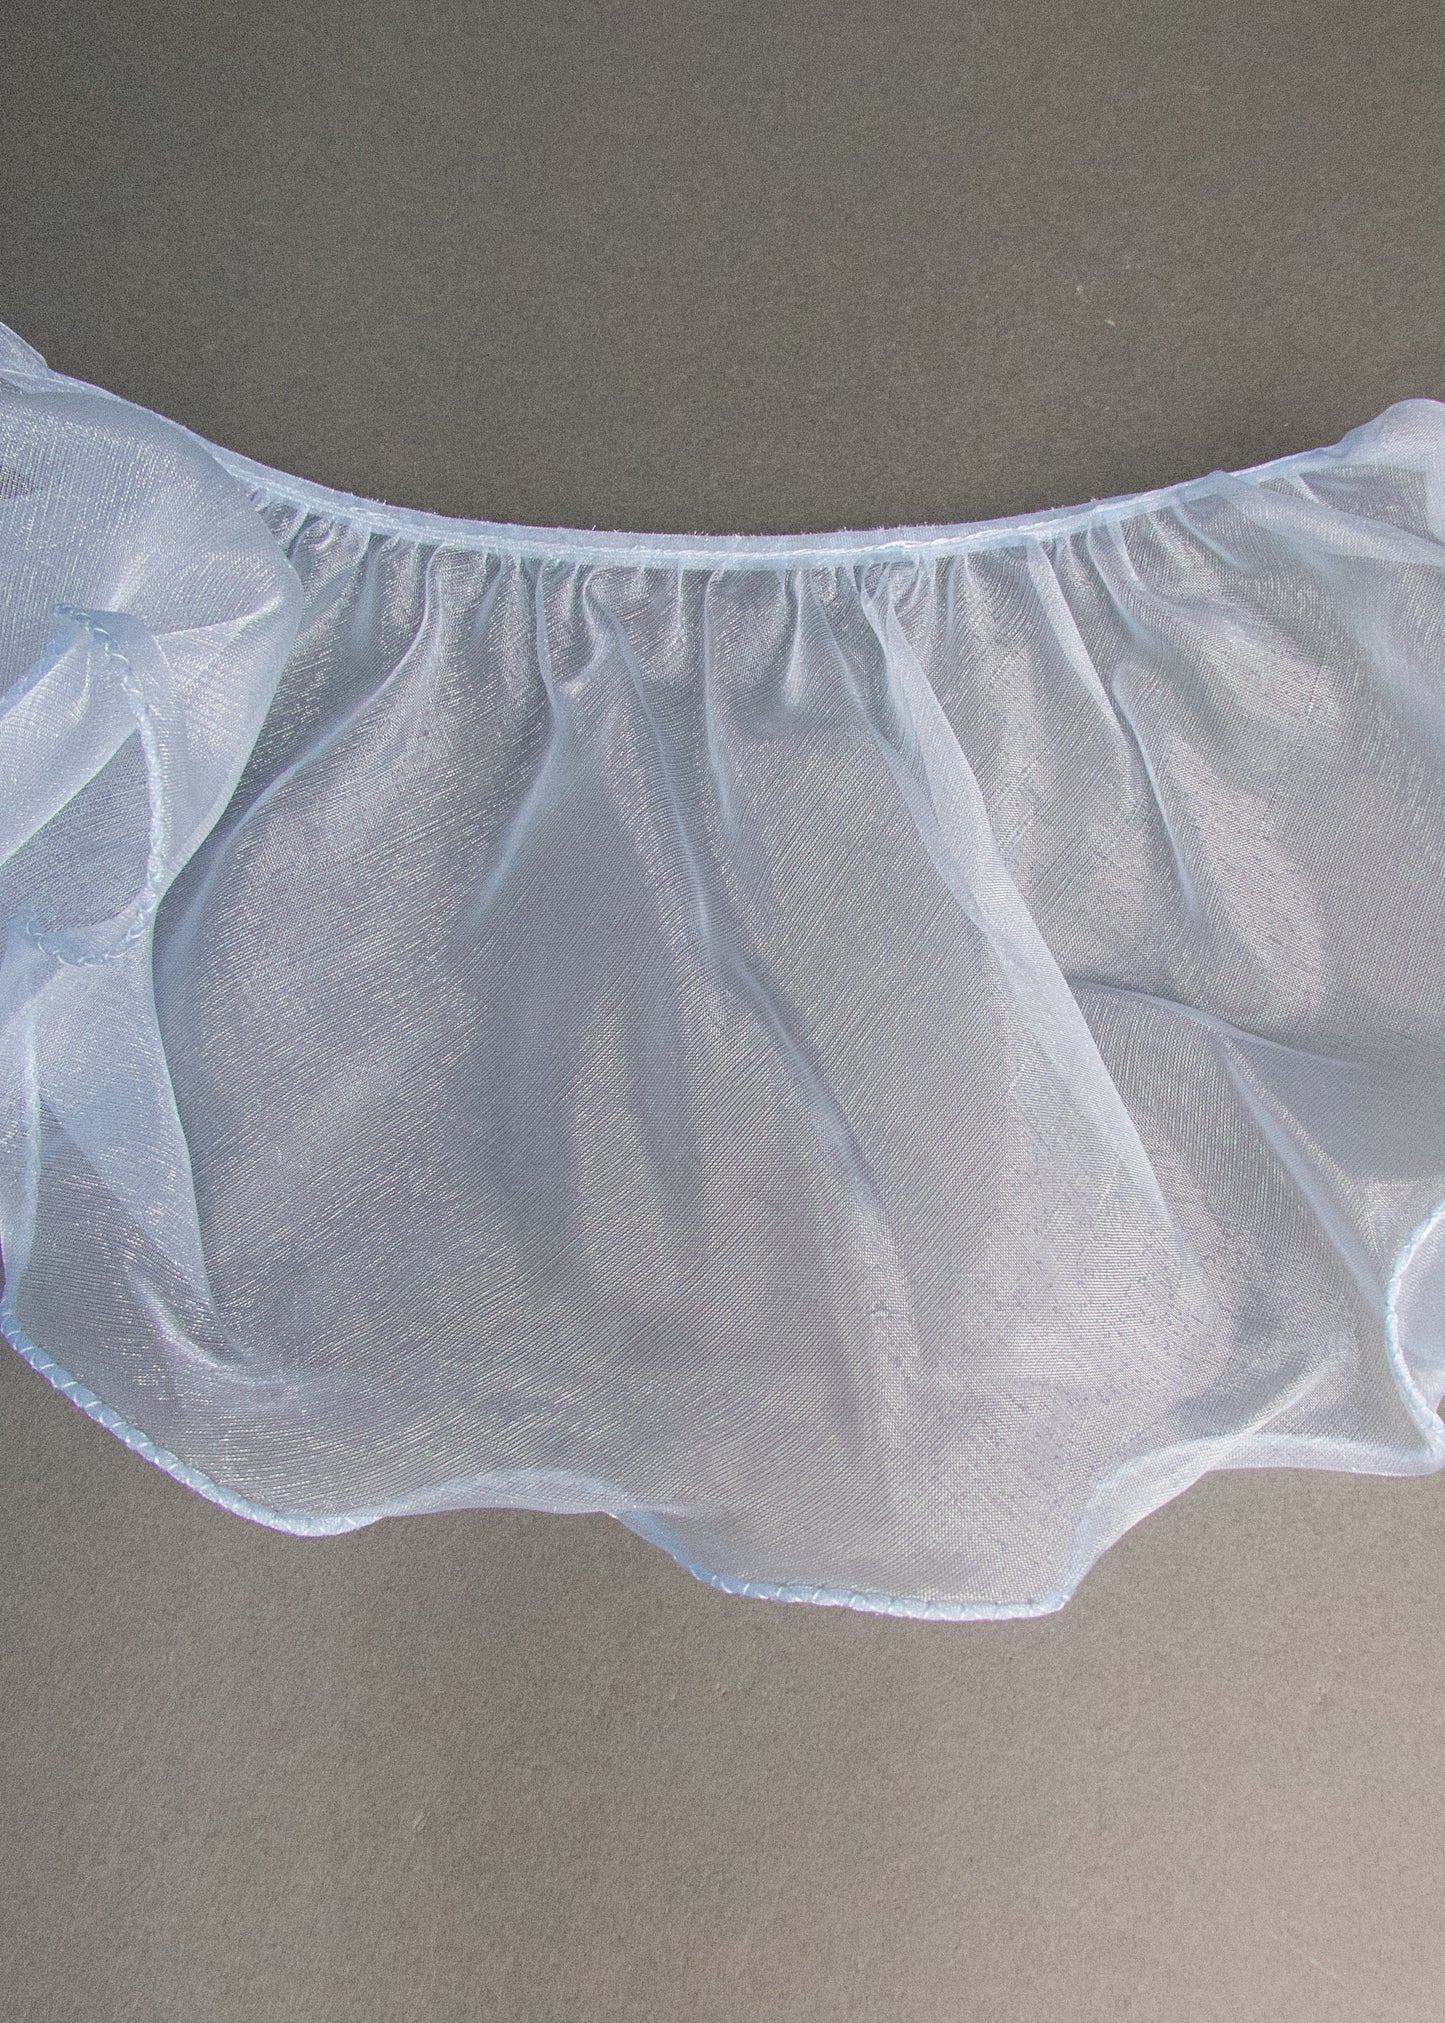 7 Inch Baby Blue Sparkle Organza Trim, Sold by the yard